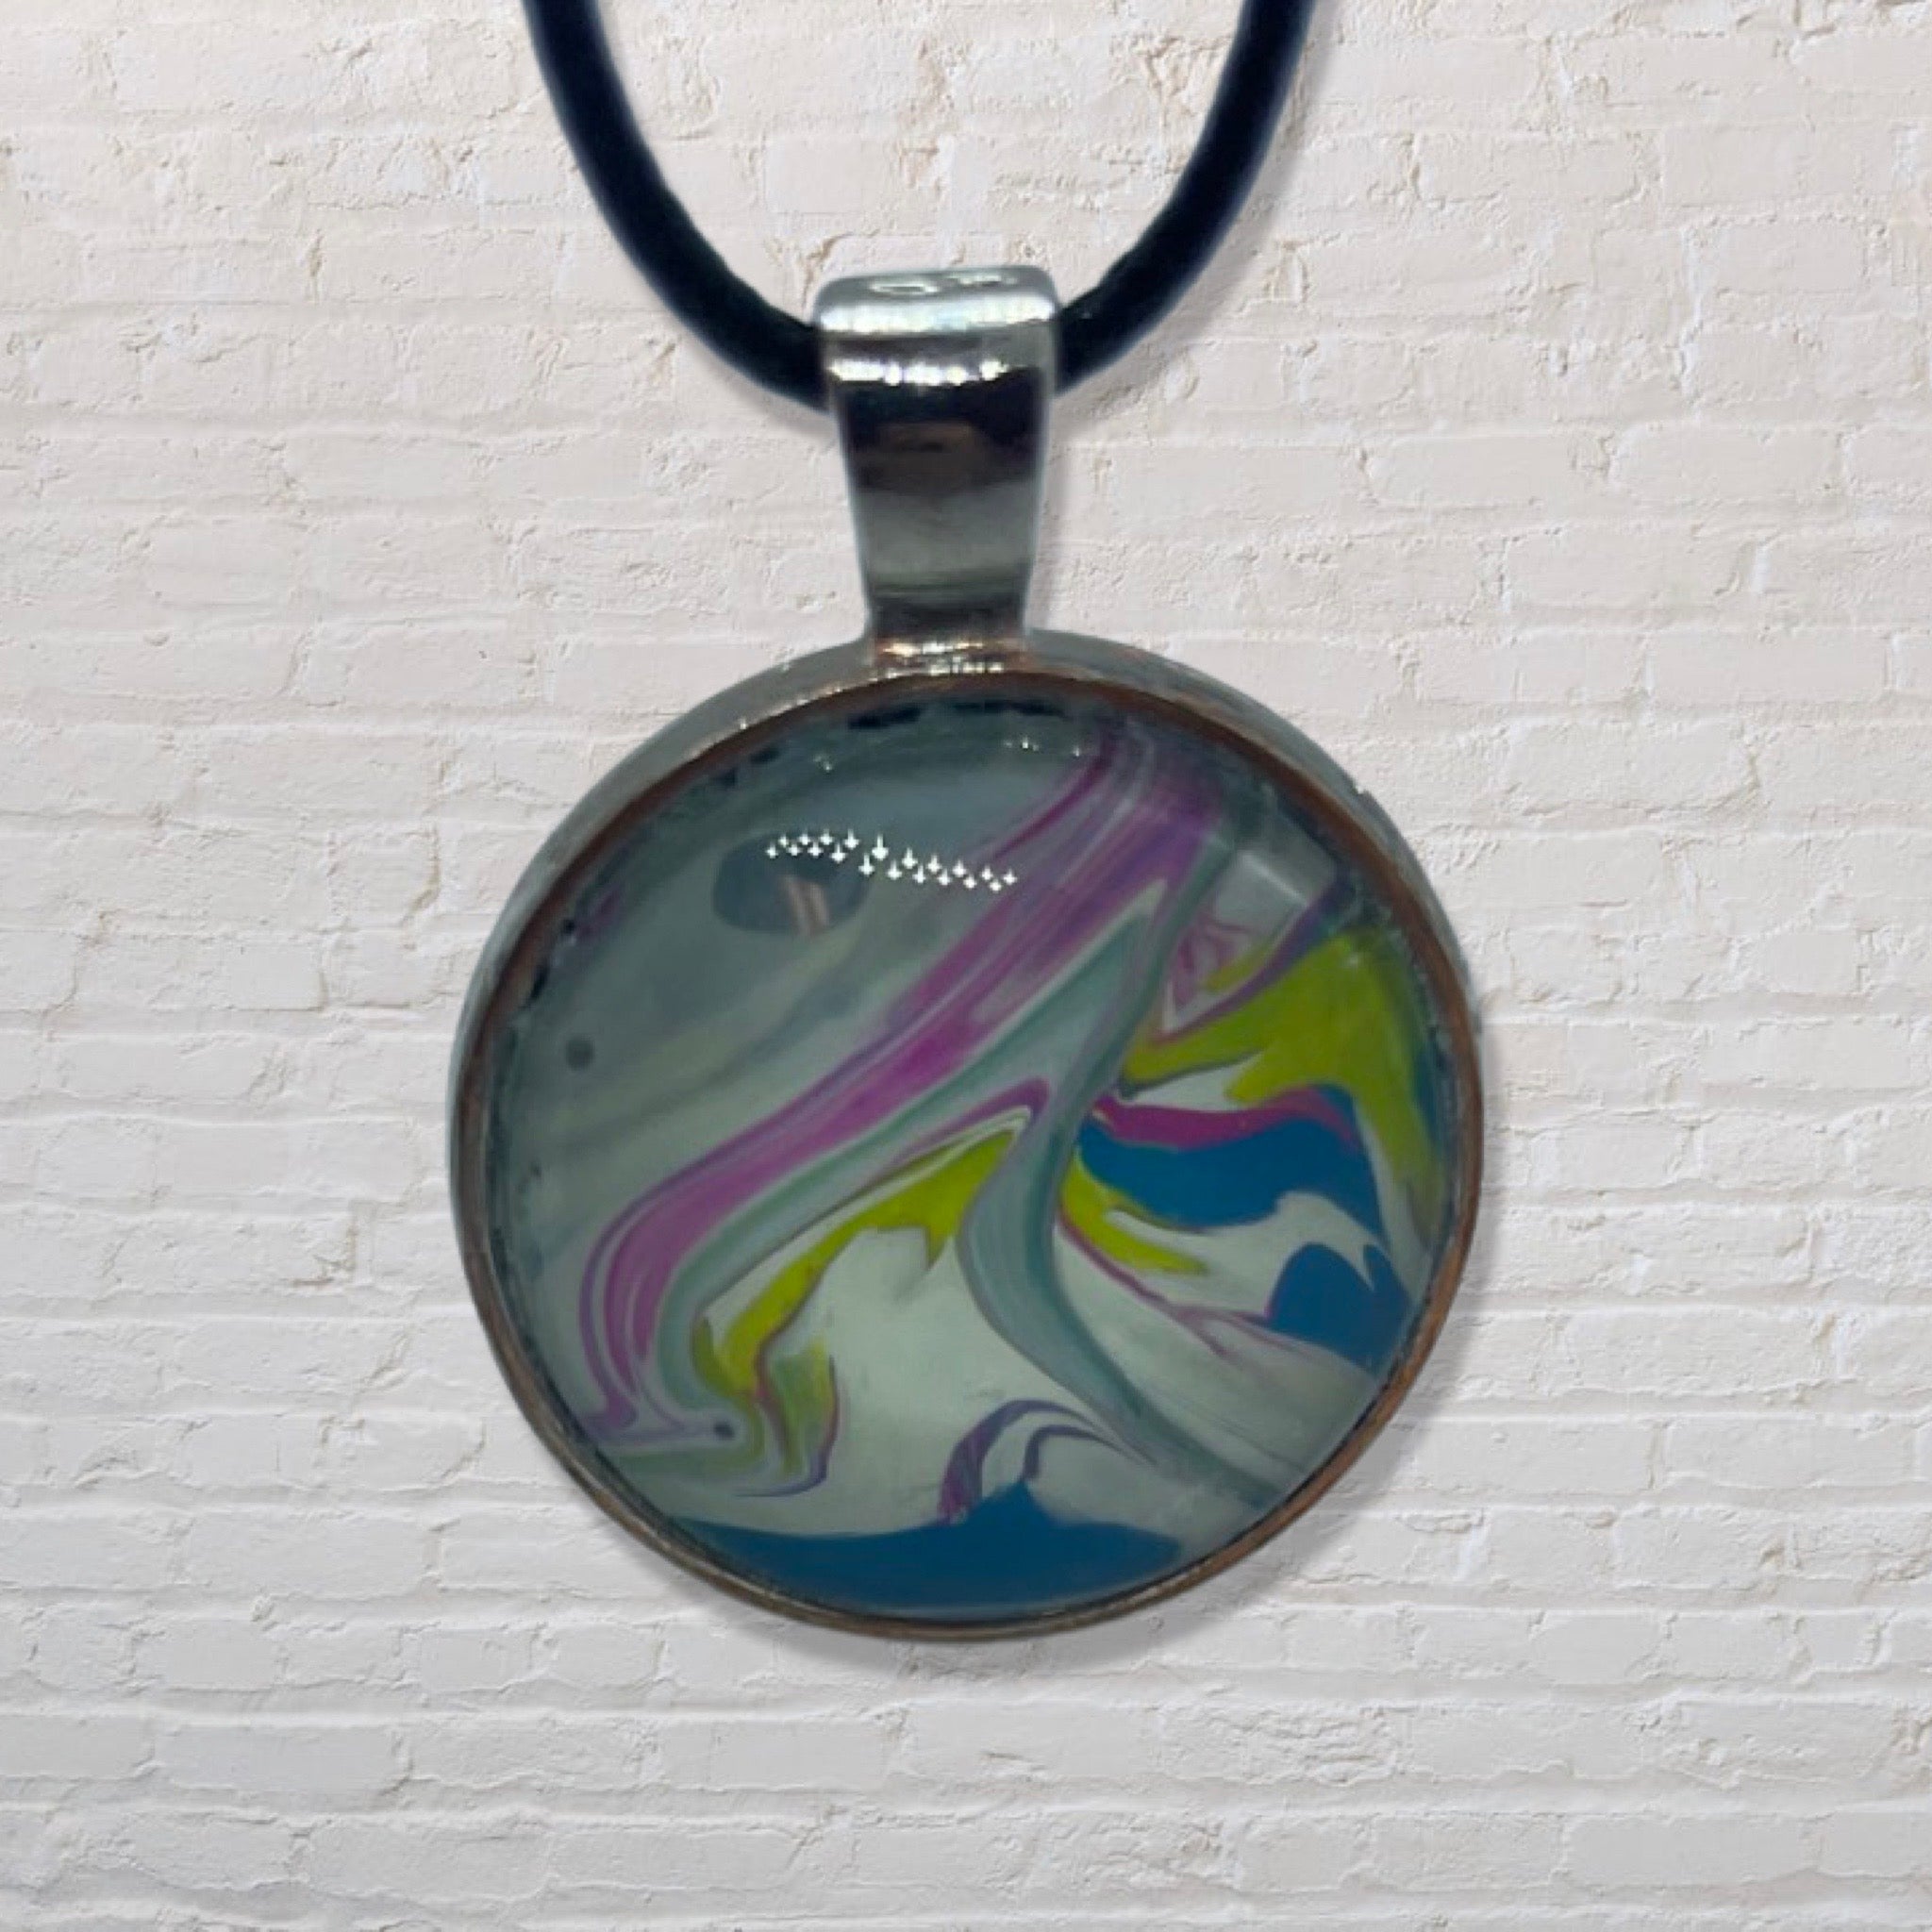 By The Kids -- Paint Pour Necklace - White, Blue, Pink and Yellow